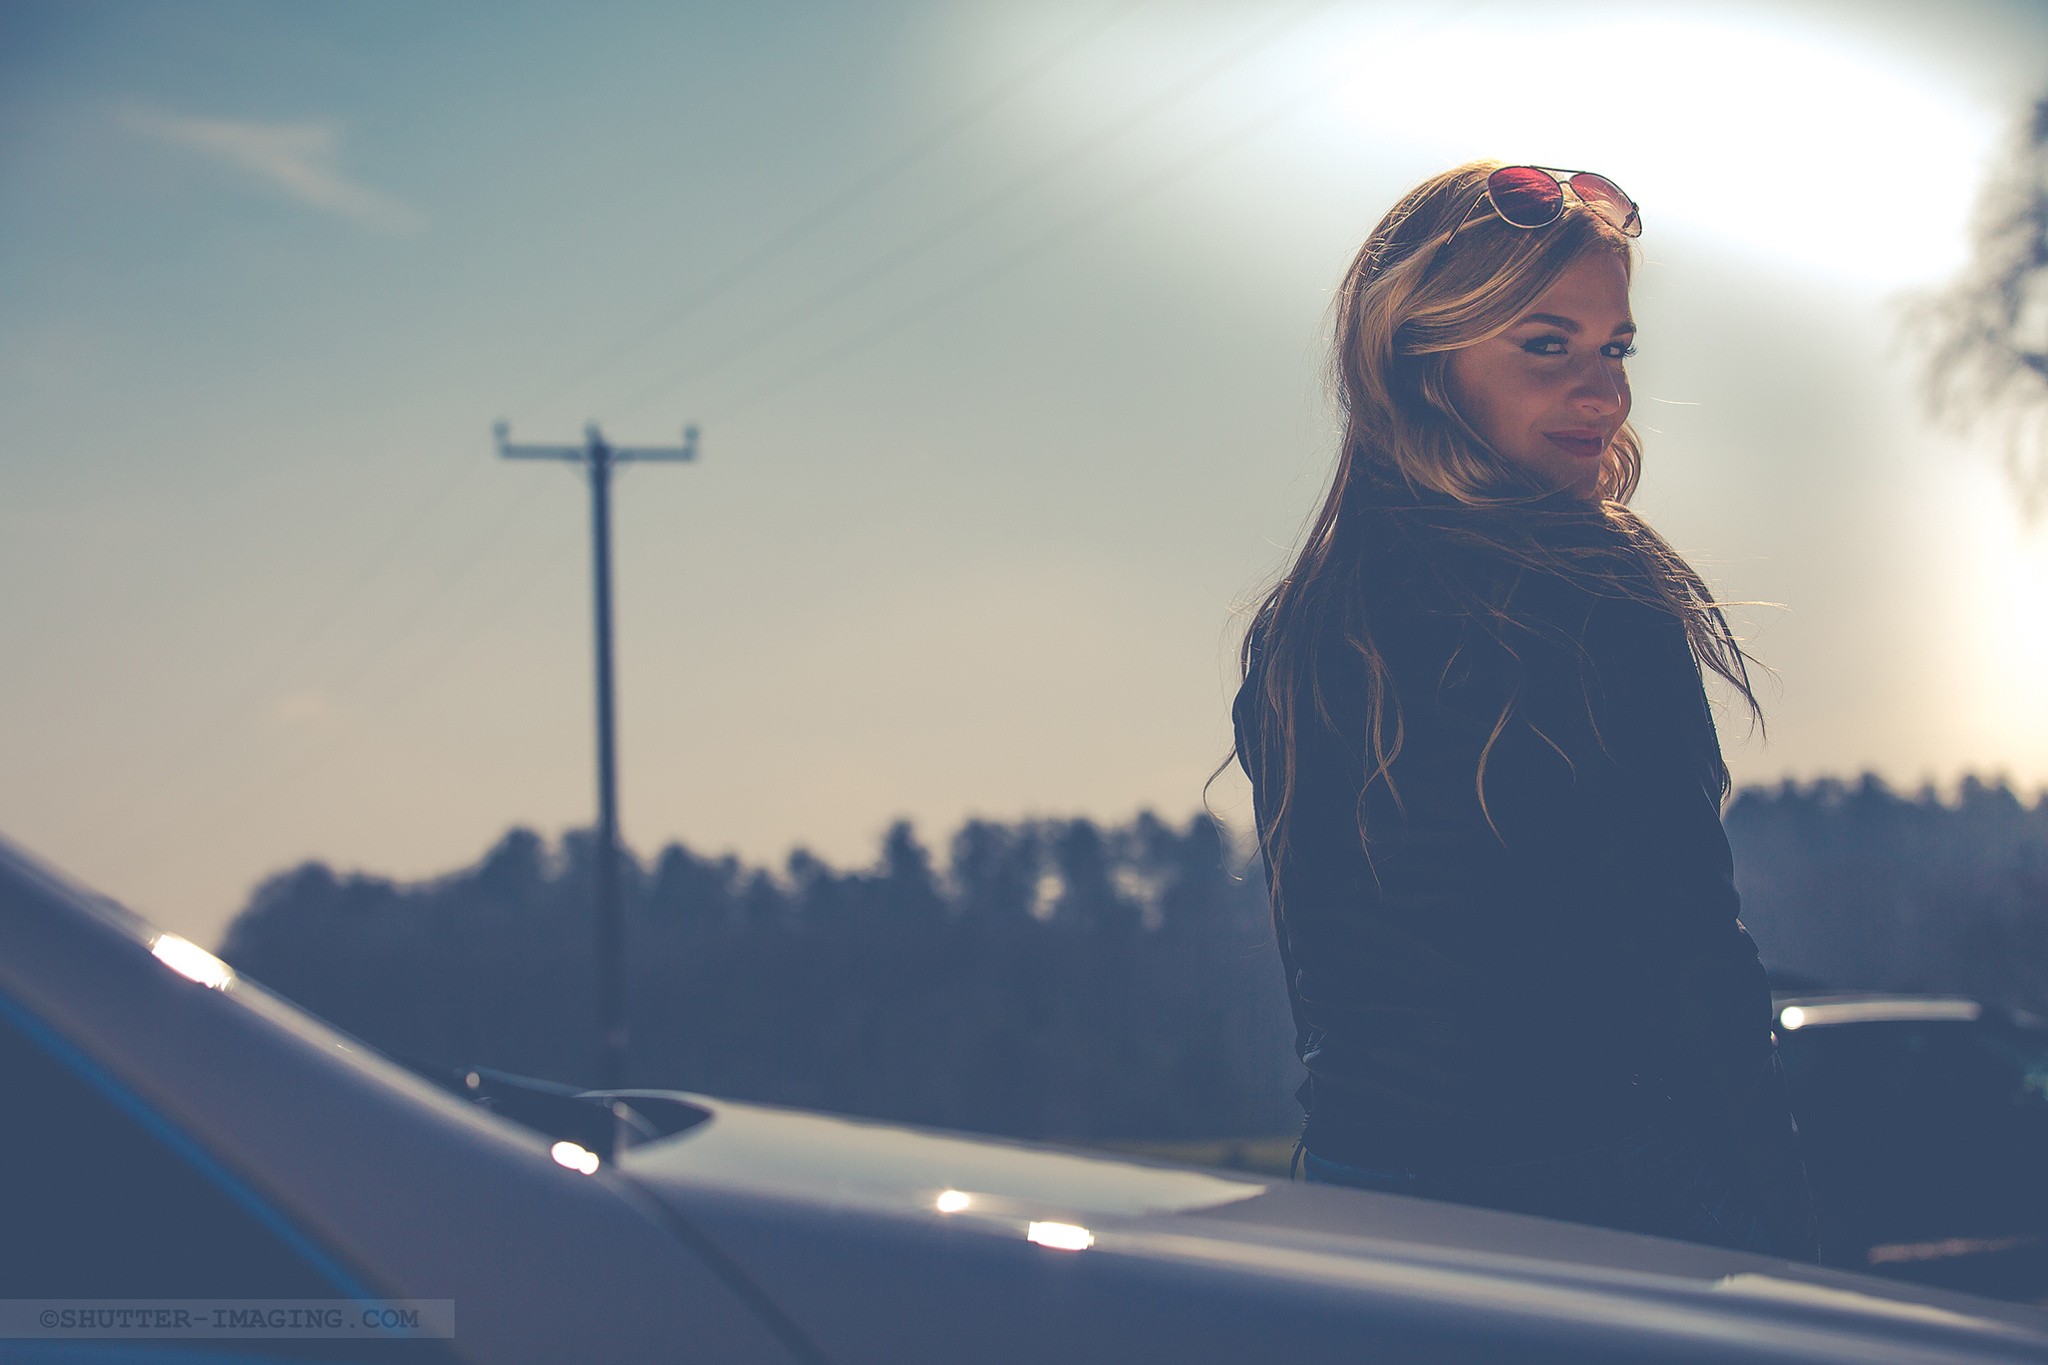 People 2048x1365 women blonde smiling glasses women outdoors car hazy rear view women with cars vehicle women with shades sunglasses long hair model looking over shoulder Shutter - Imaging